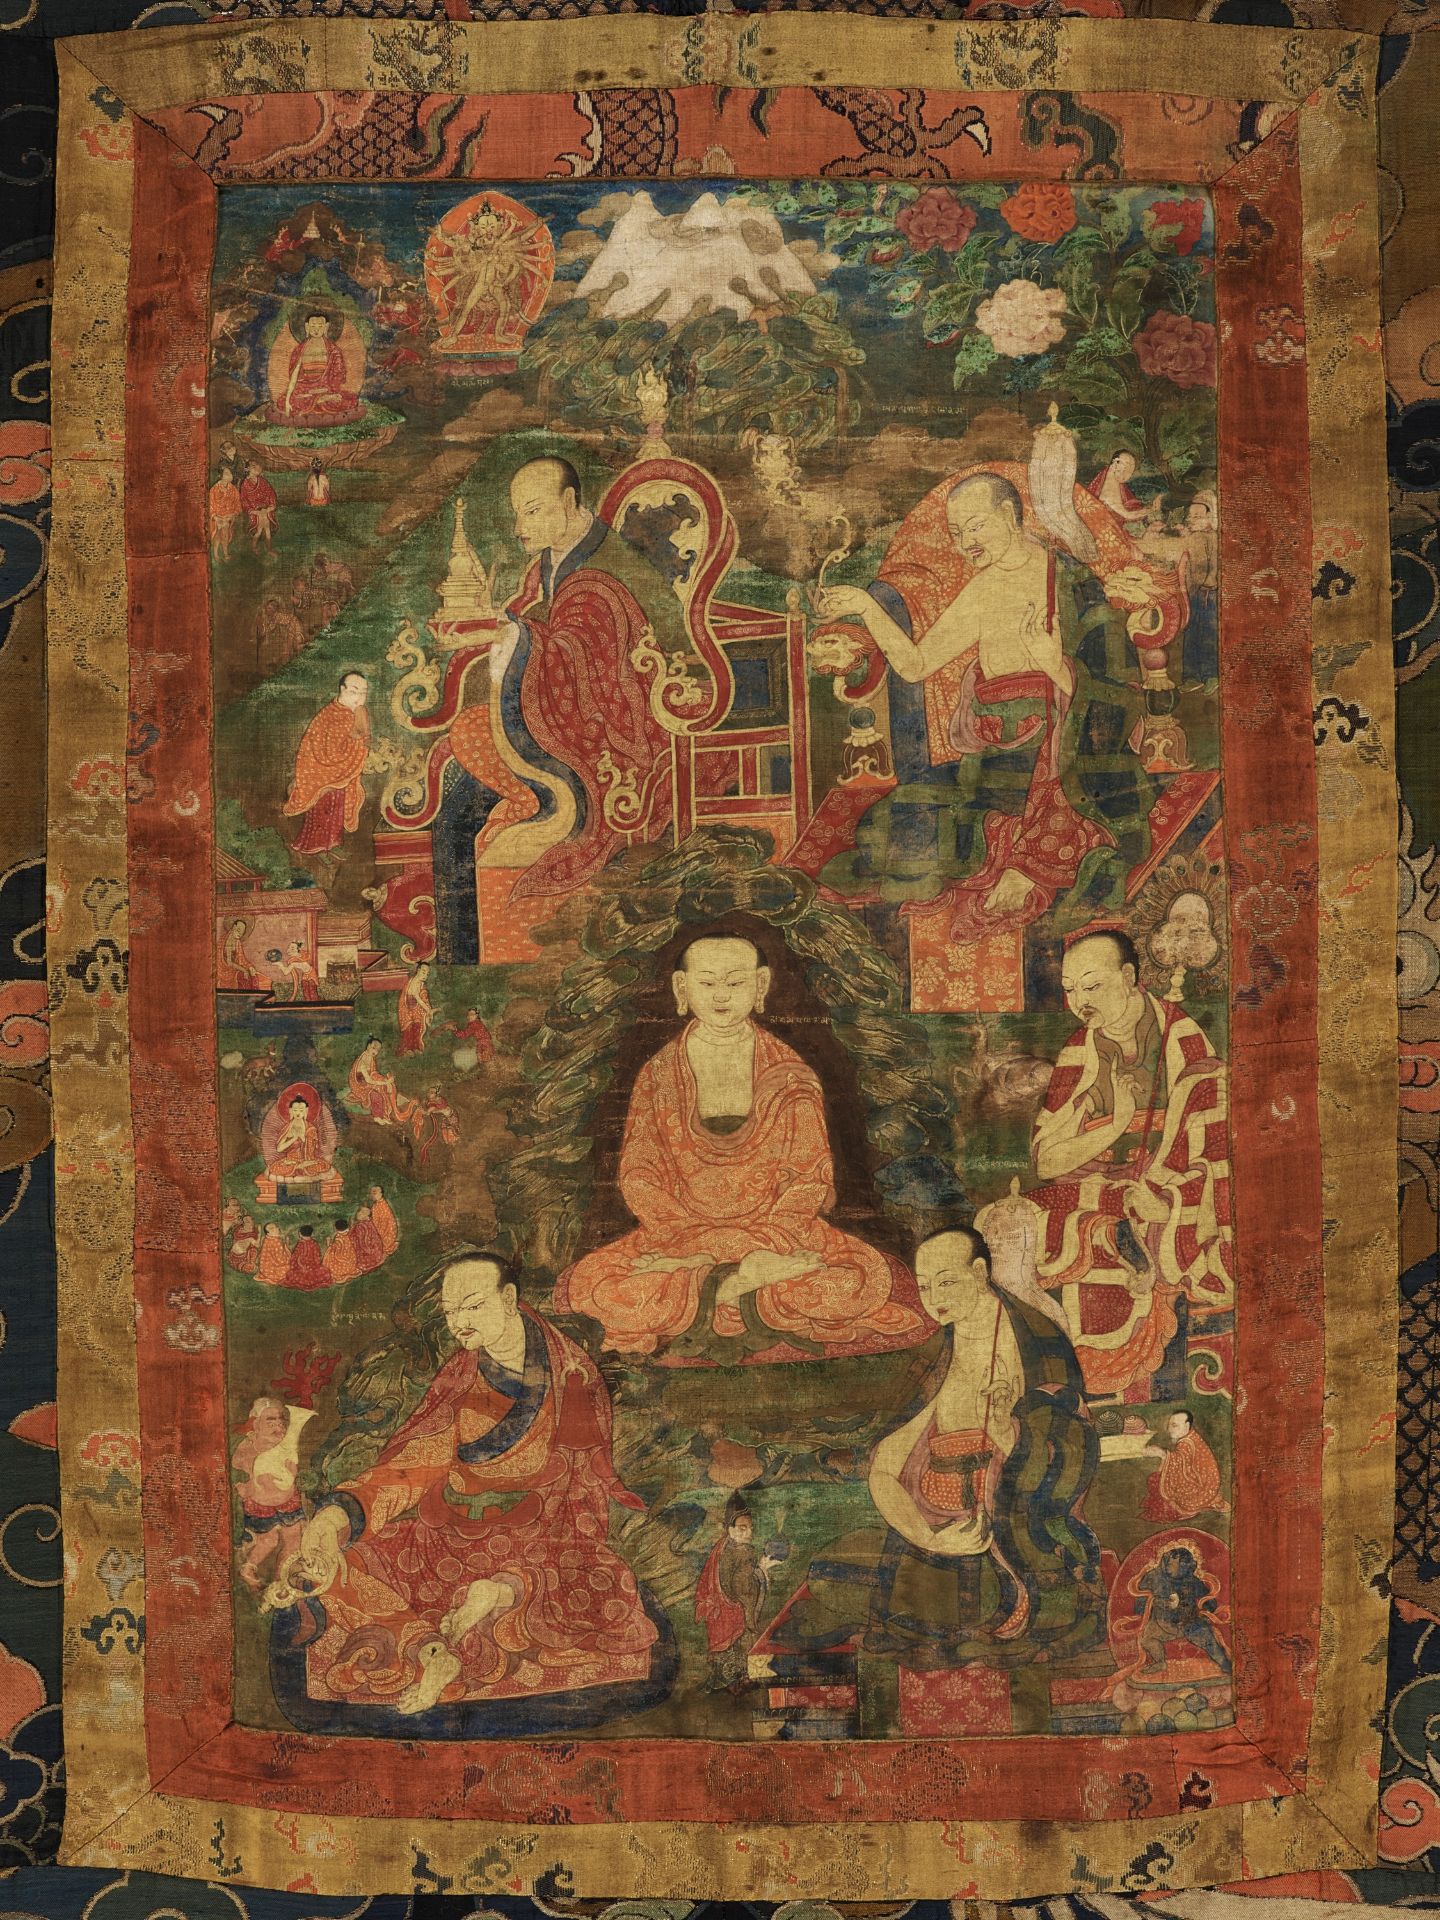 A THANGKA OF FIVE ARHATS, 18TH-19TH CENTURY